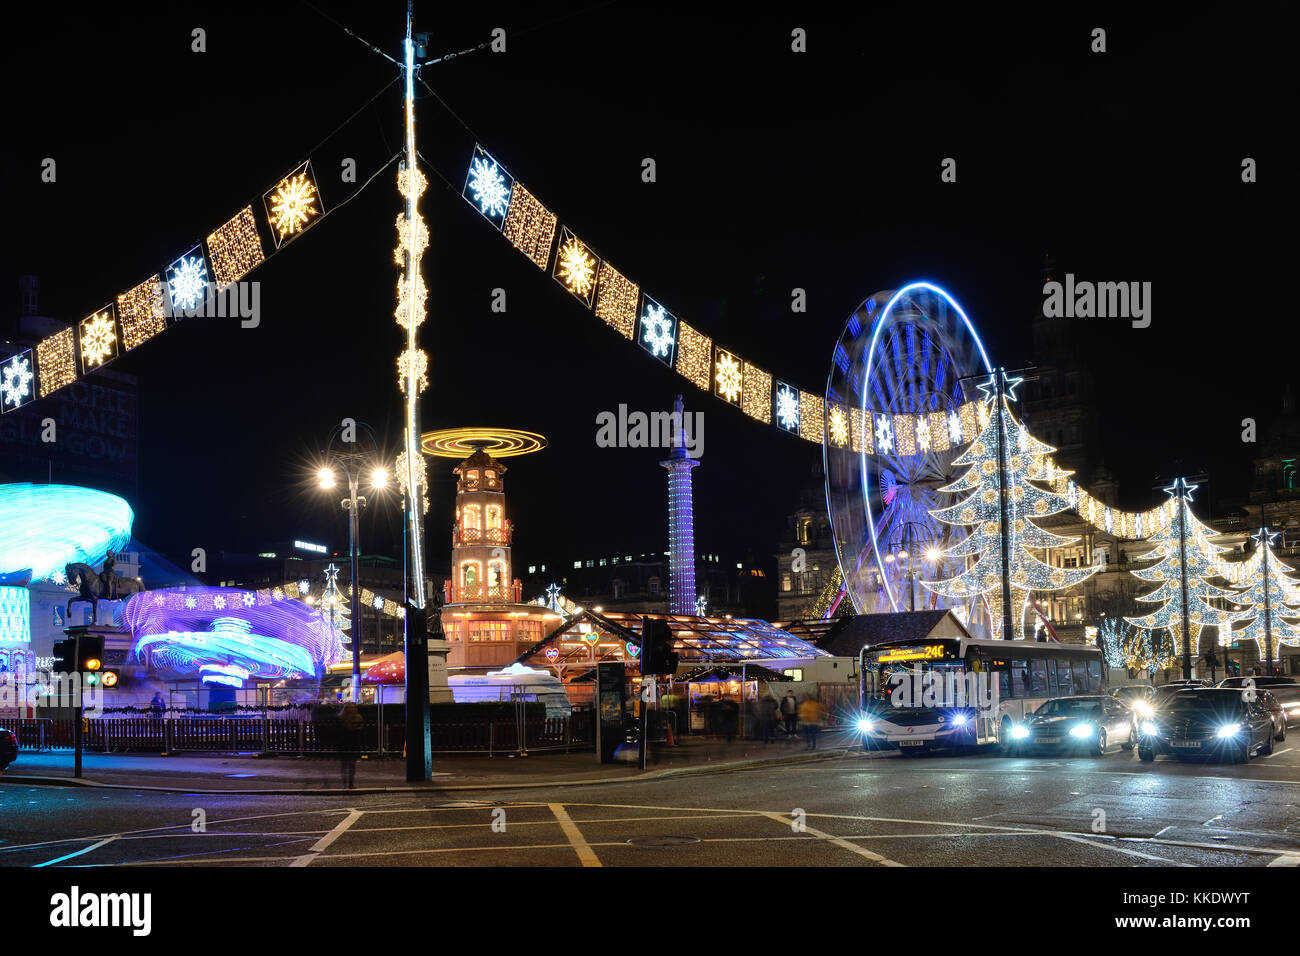 Glasgow, George Square Christmas lights and fairground attractions Stock Photo